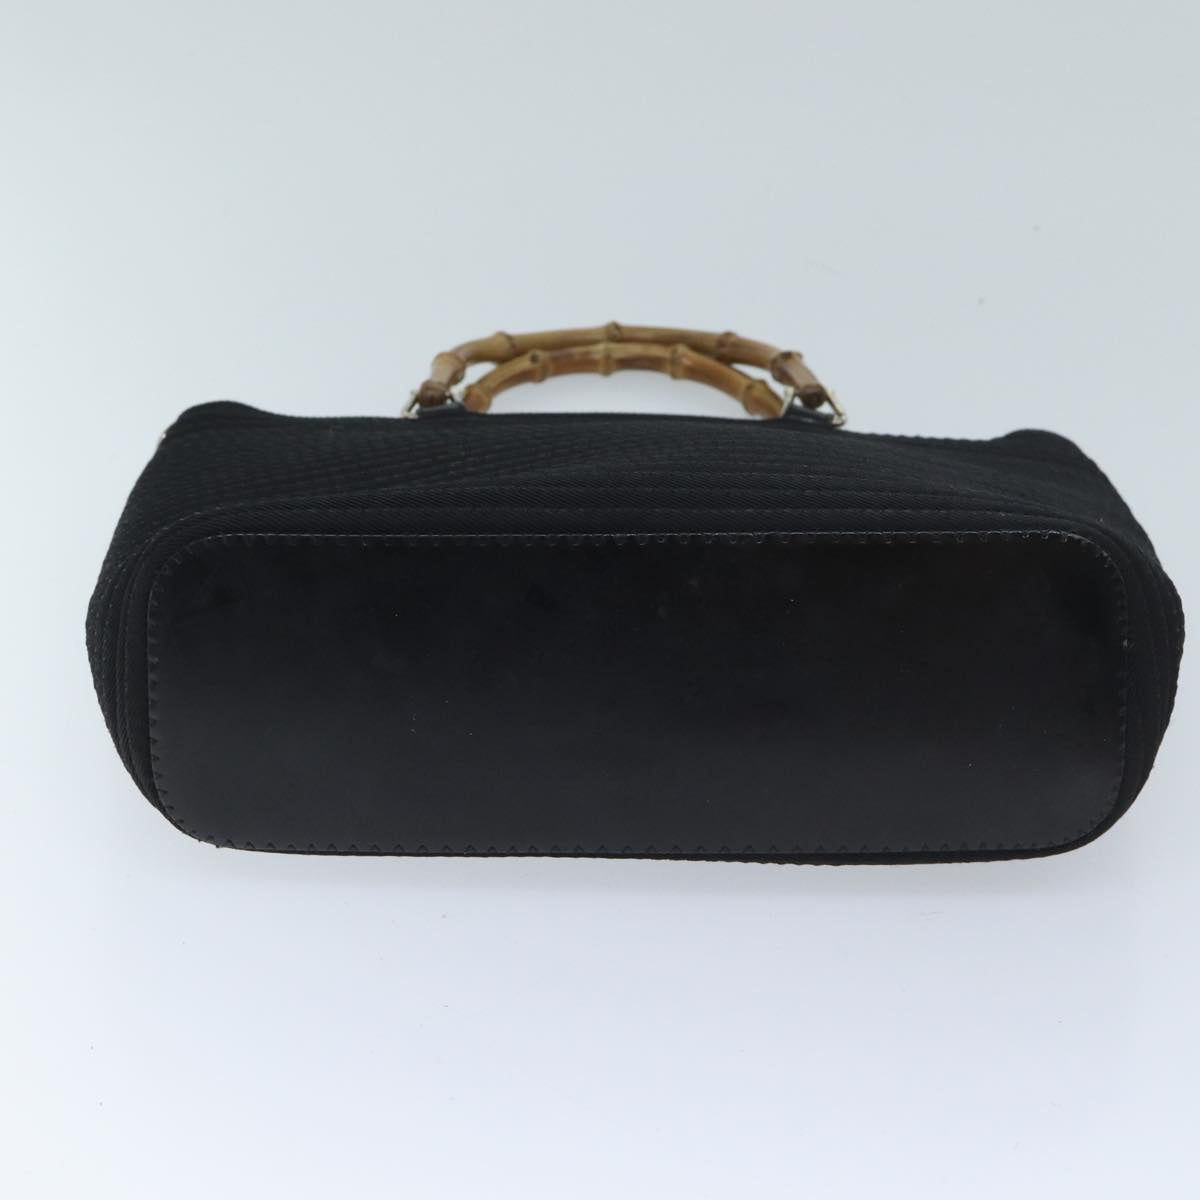 GUCCI Bamboo Hand Bag Canvas Outlet 2way Black 000 1998 0540 Auth 70191